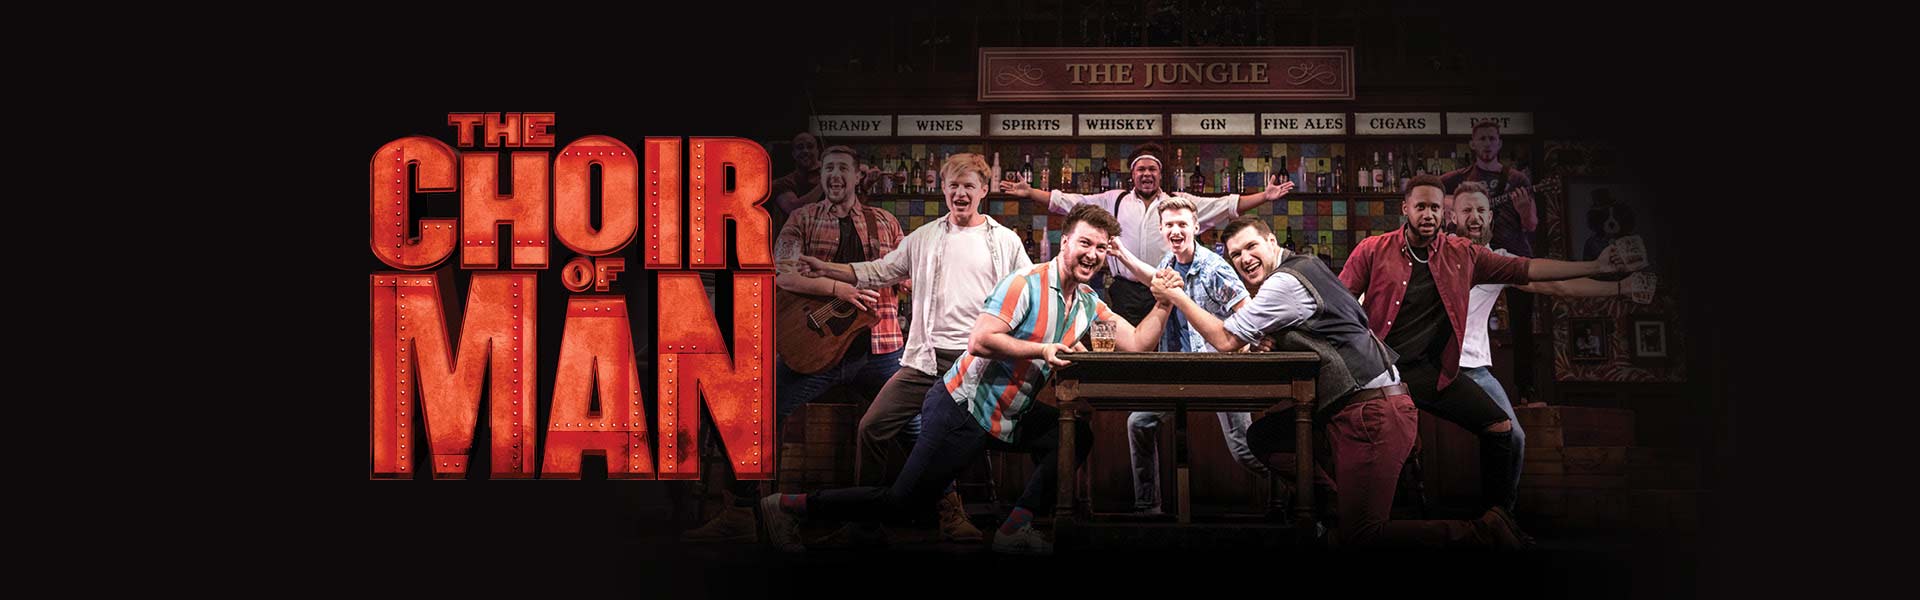 Picture of the cast of Choir of Man arm wrestling